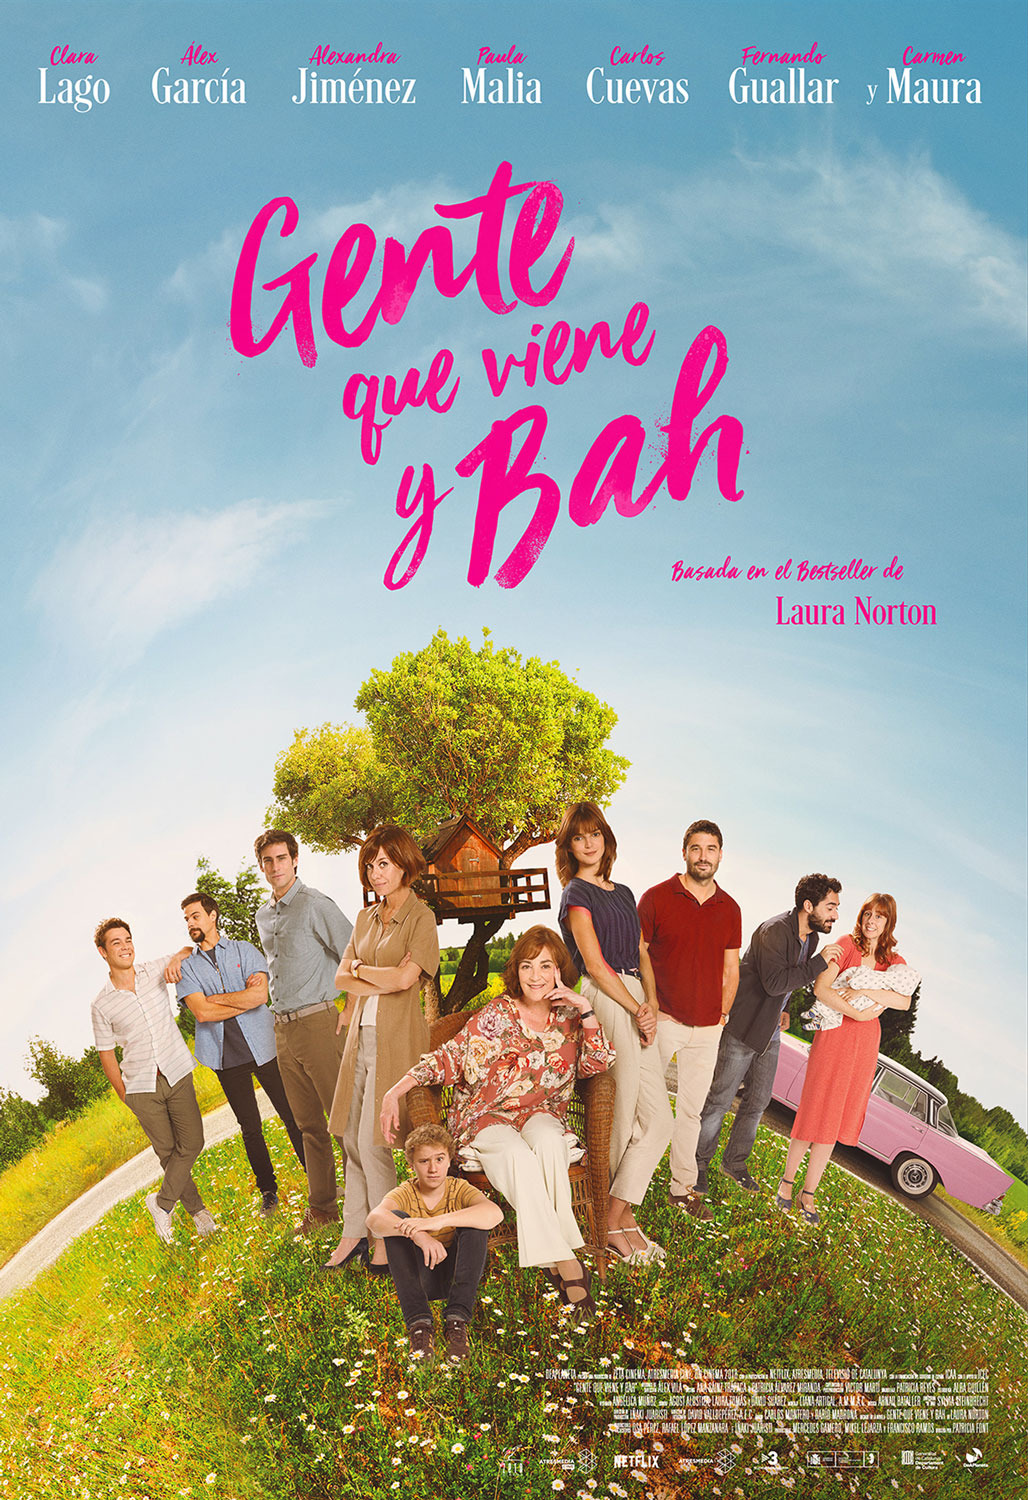 Extra Large Movie Poster Image for Gente que viene y bah 